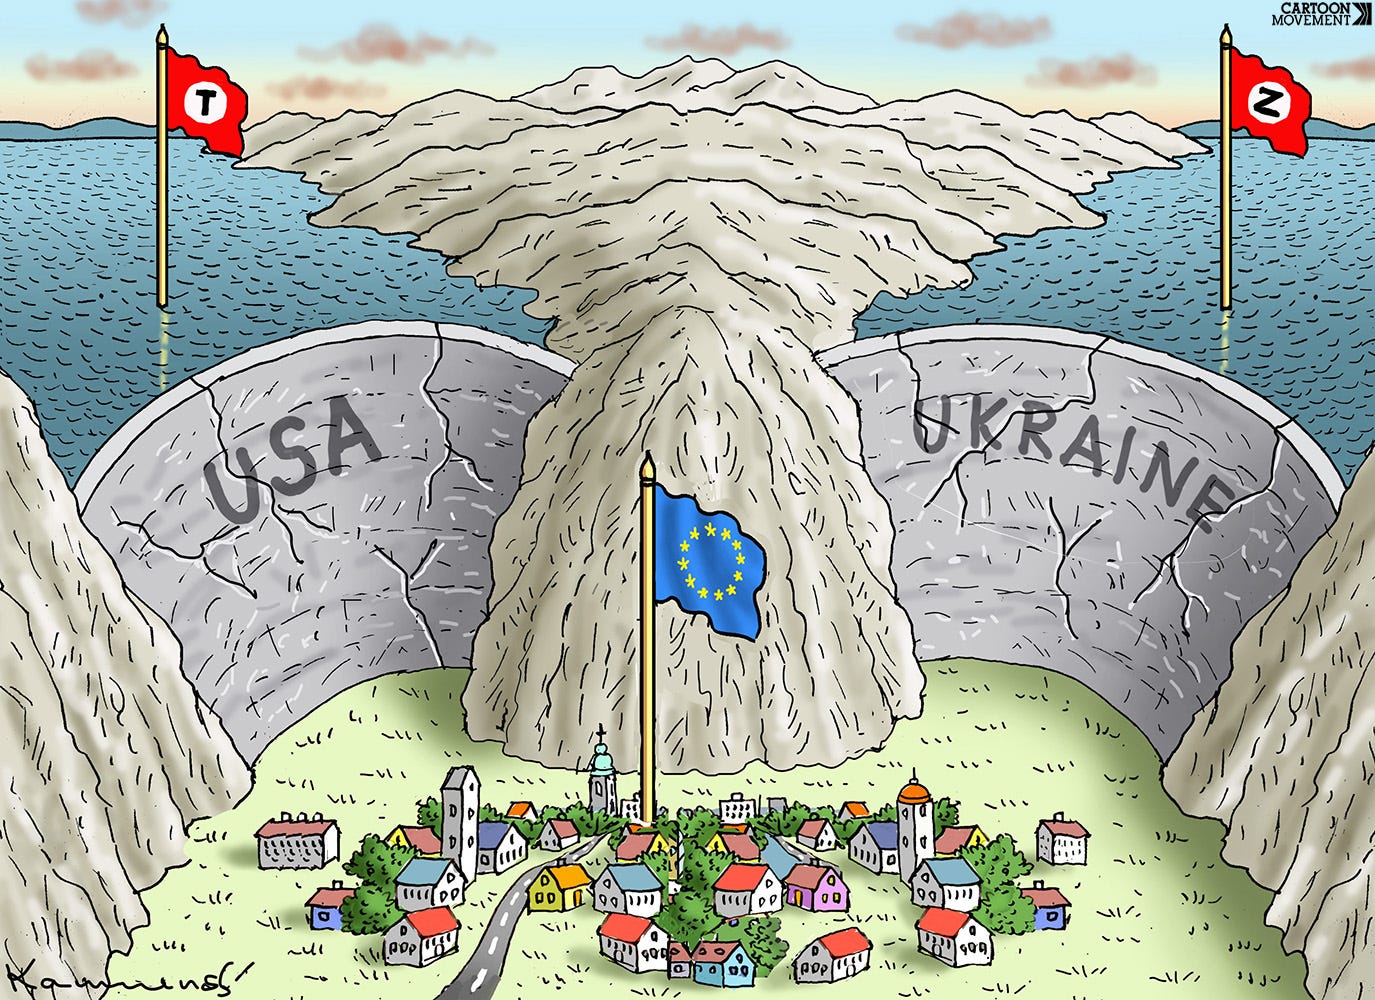 Cartoon showing Europe as a village at the bottom of a valley in the shadow of two giant dams, one labeled USA, with a flag of Trump on top and one labeled Ukraine with a flag with a Z on top. Both dams are cracked.